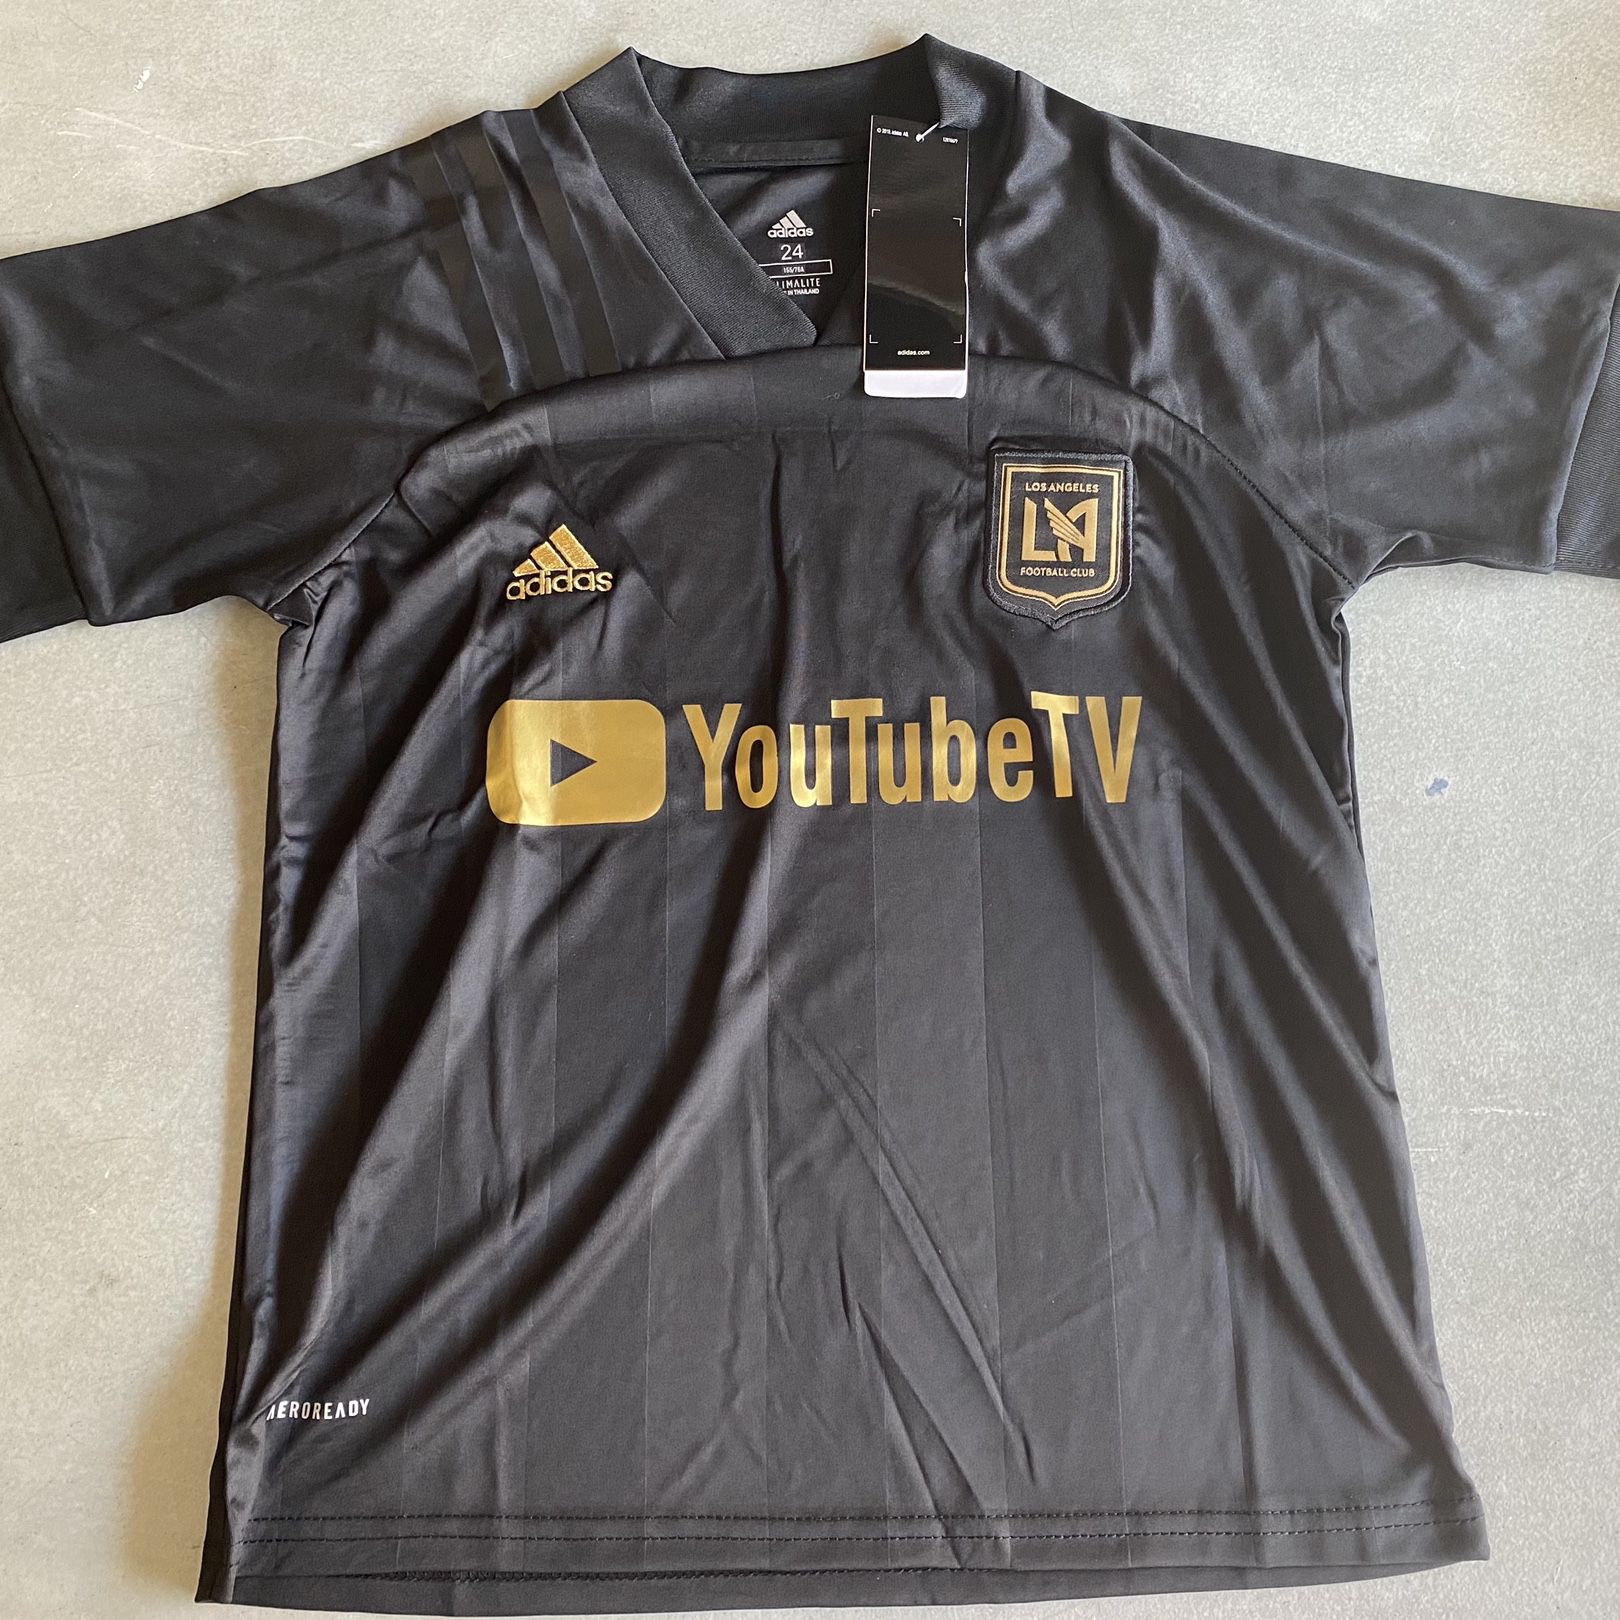 Adidas LAFC Jersey ( Tv Edition) for Sale in Bakersfield